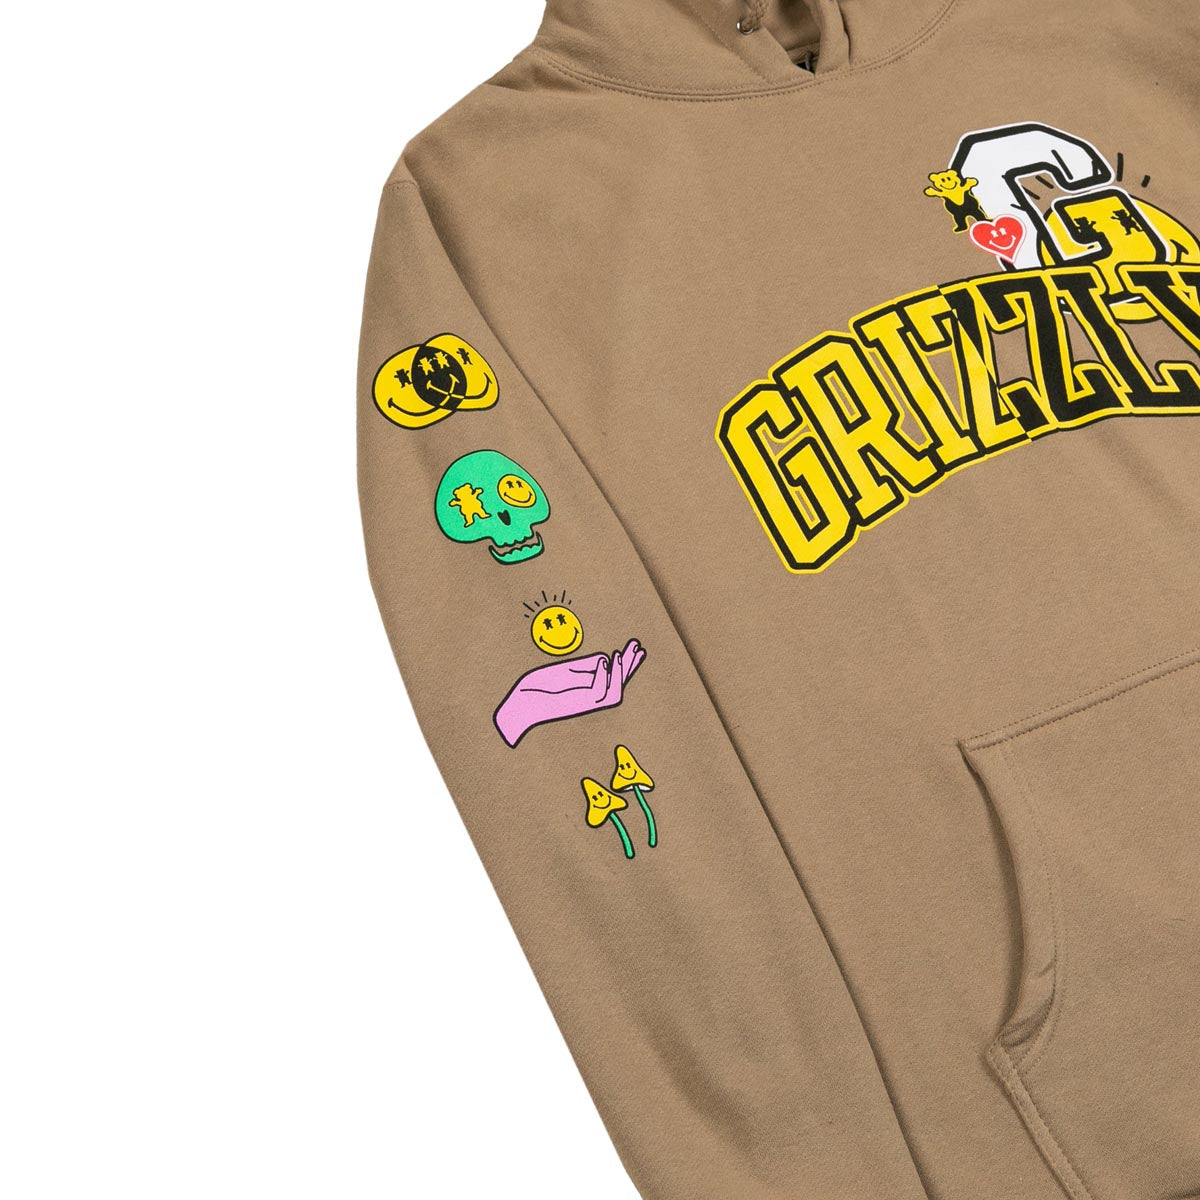 Grizzly x Smiley World Hoodie - Tan image 3